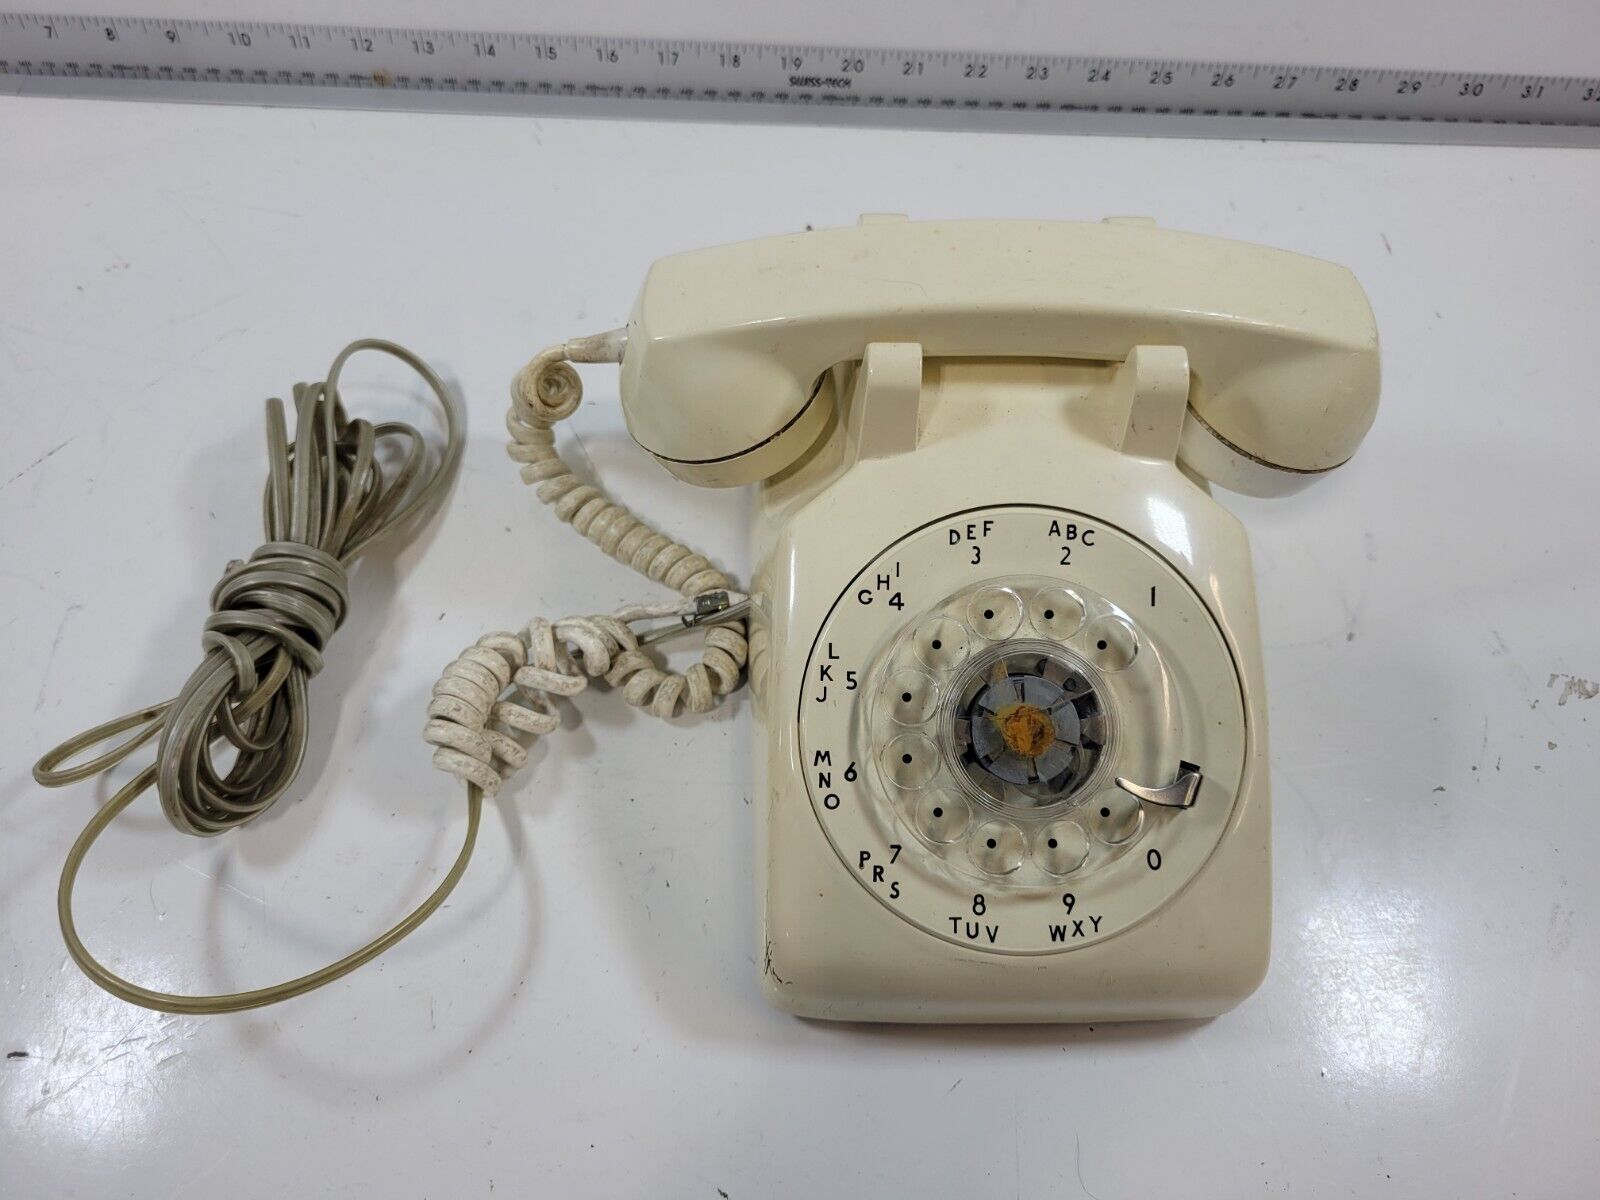 NORTHERN Electric WHITE ROTARY MODULAR  PHONE - UNTESTED